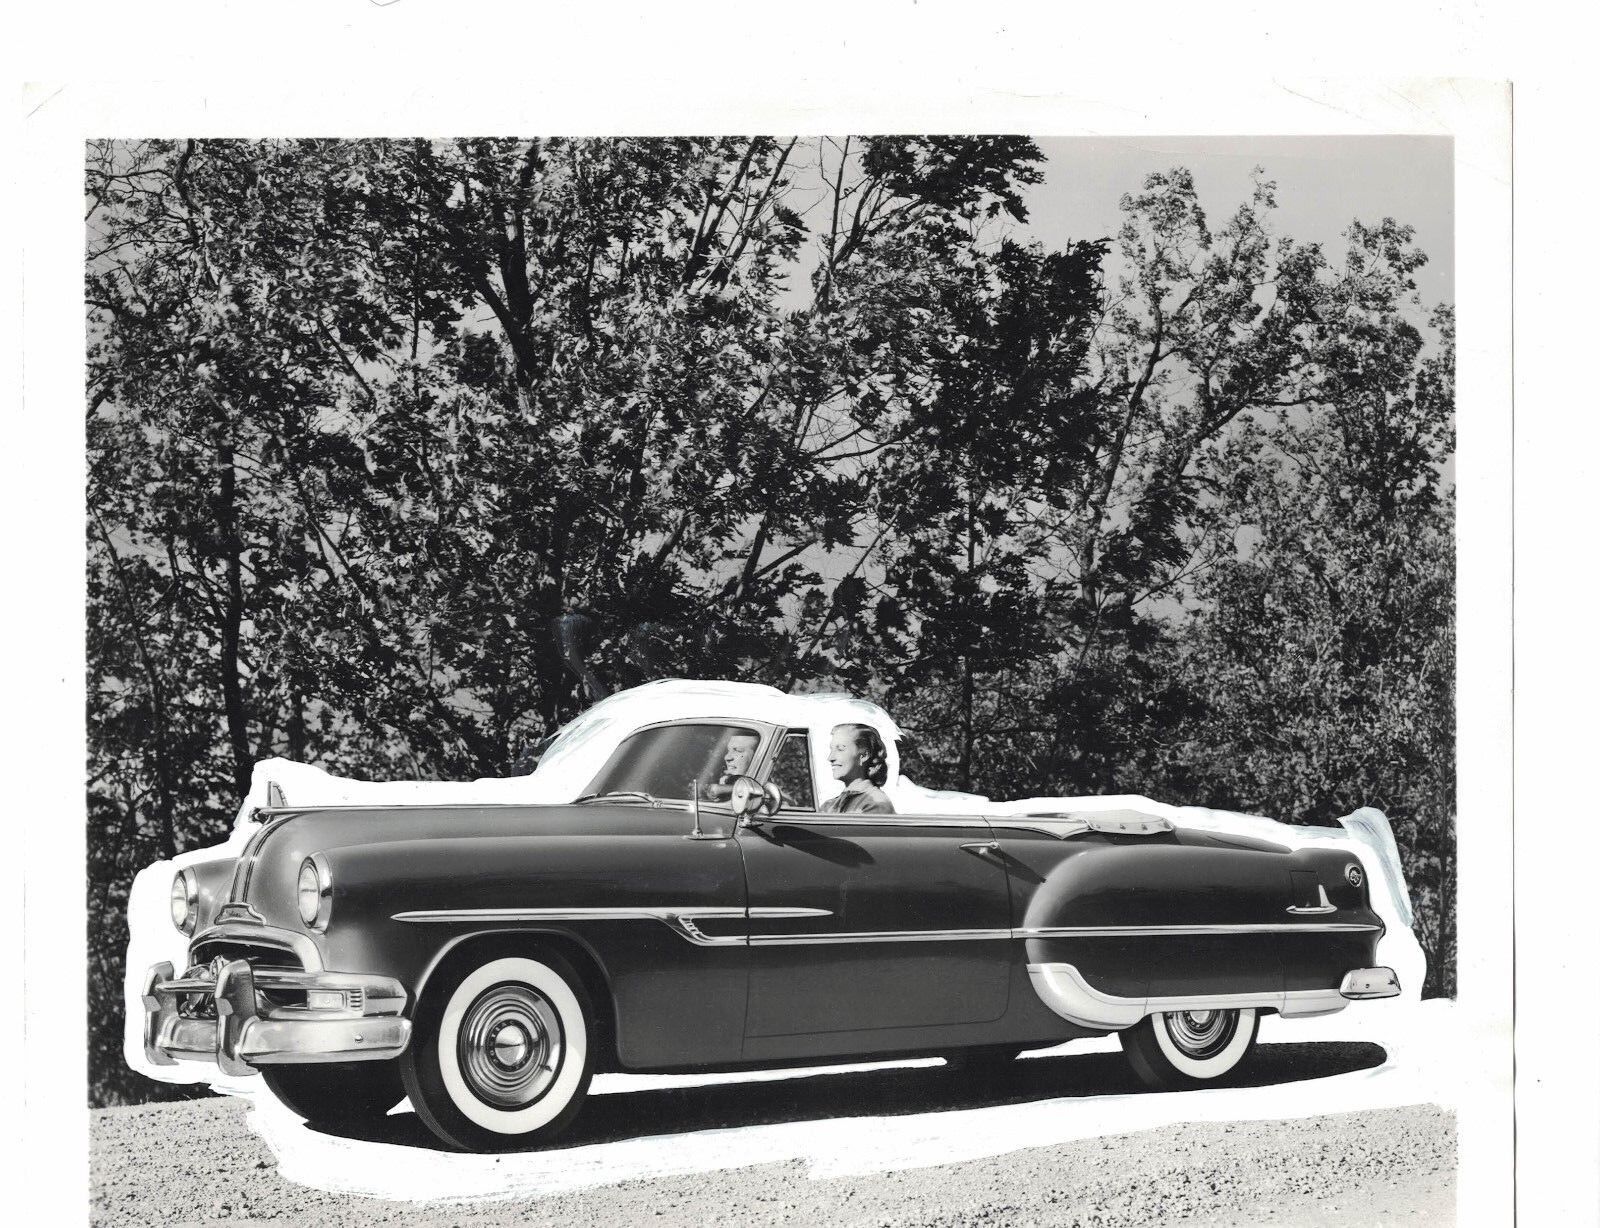 Vintage 1953 Pontiac Convertible Automobile Used Public Relations Photo Poster painting